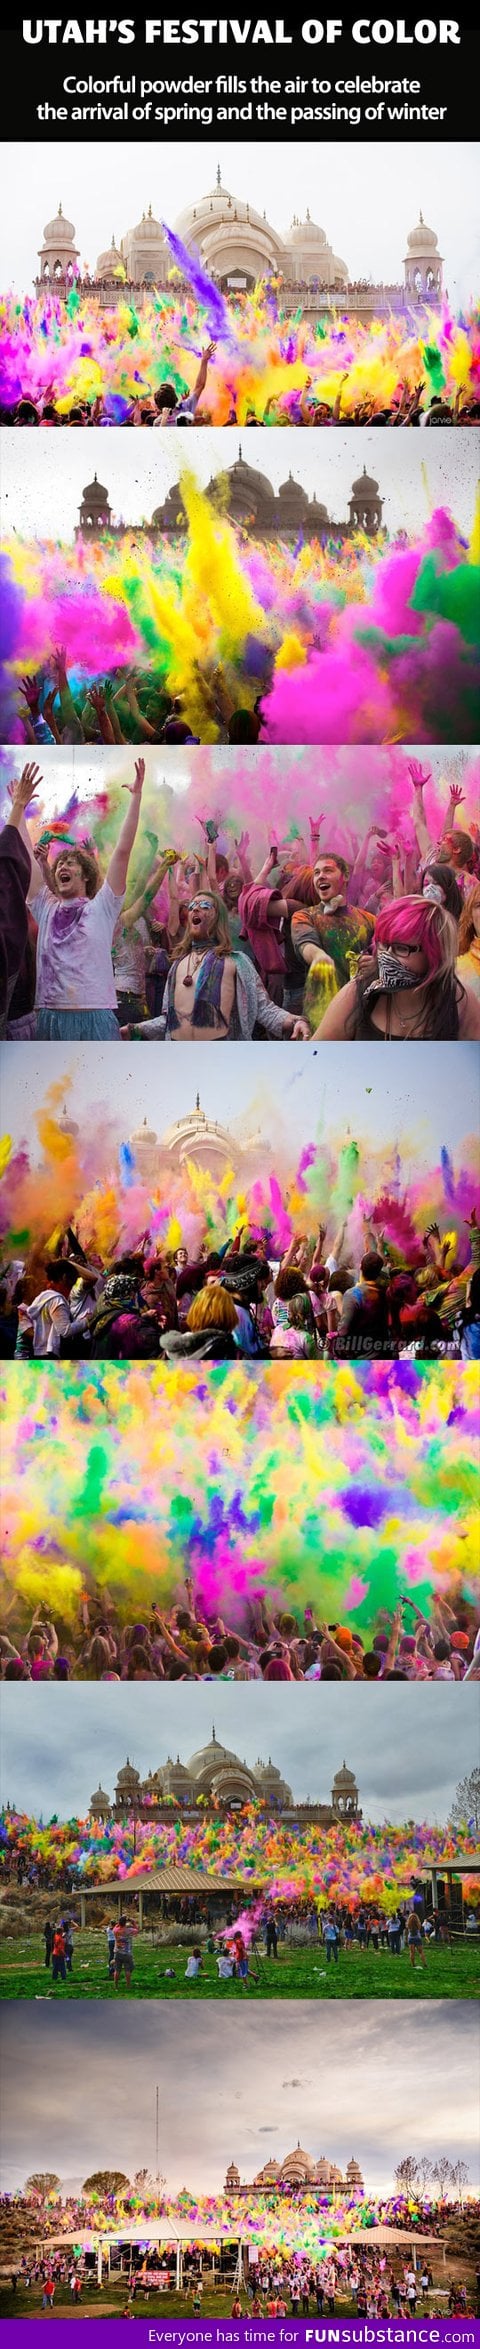 Awesome Festival of Color